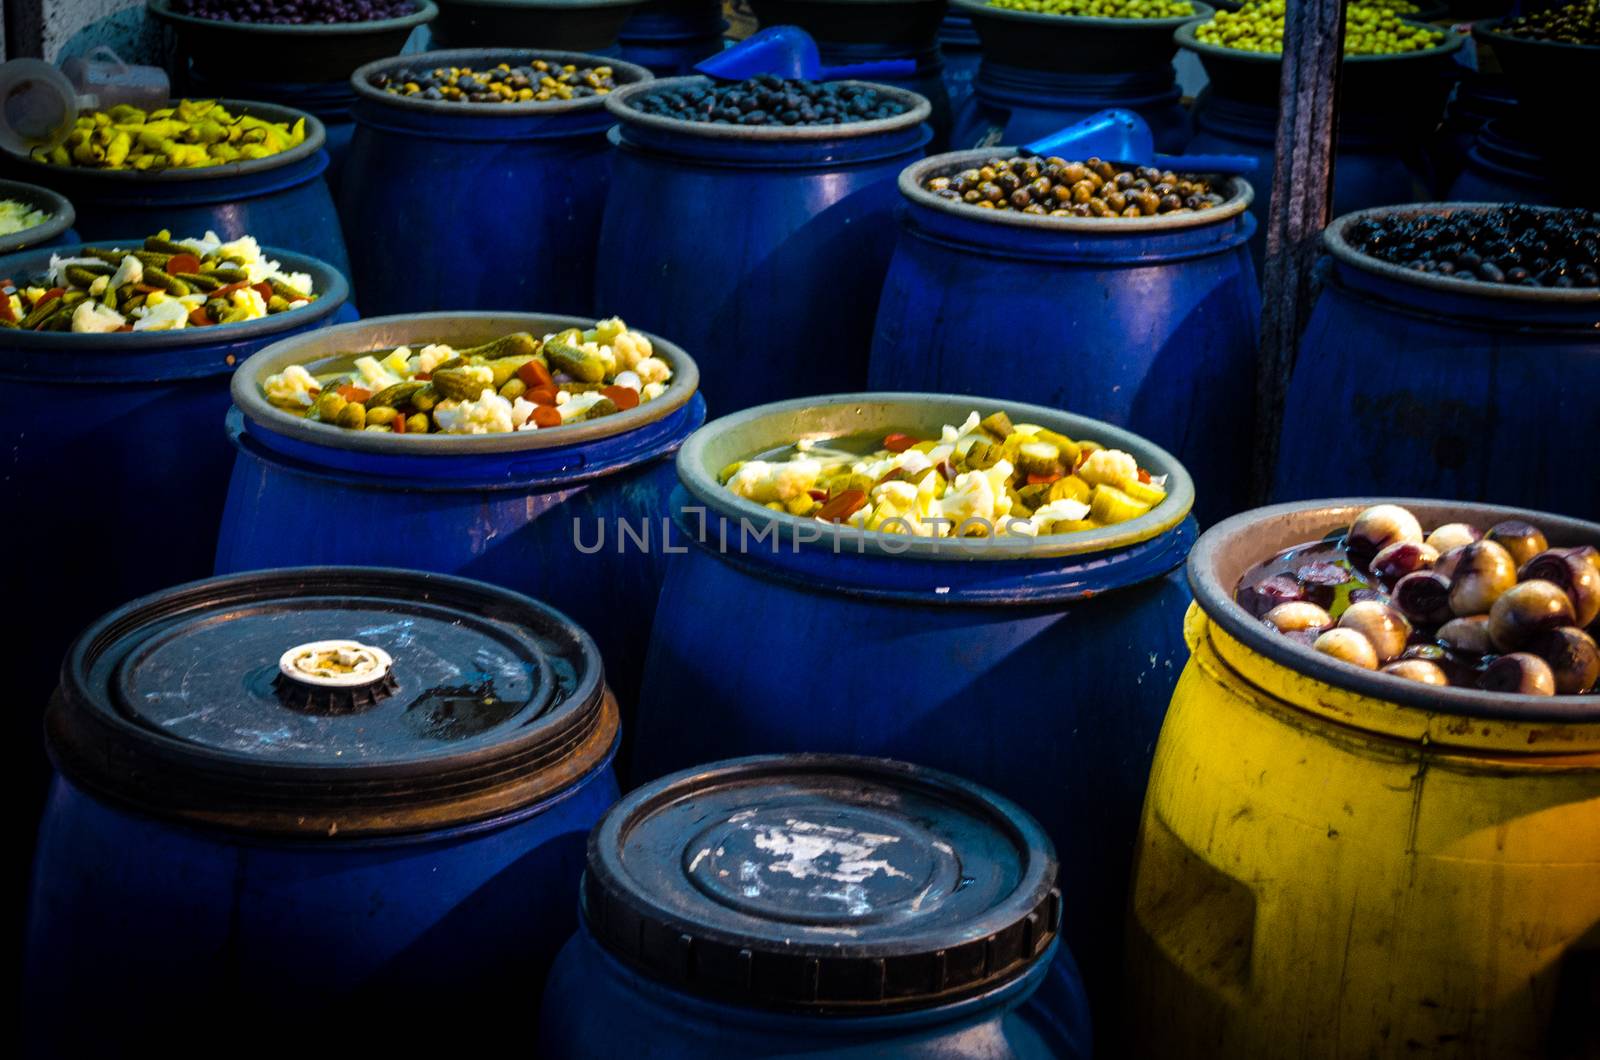 different types of vegetables, fruits and pickles on blue barrel by mikelju